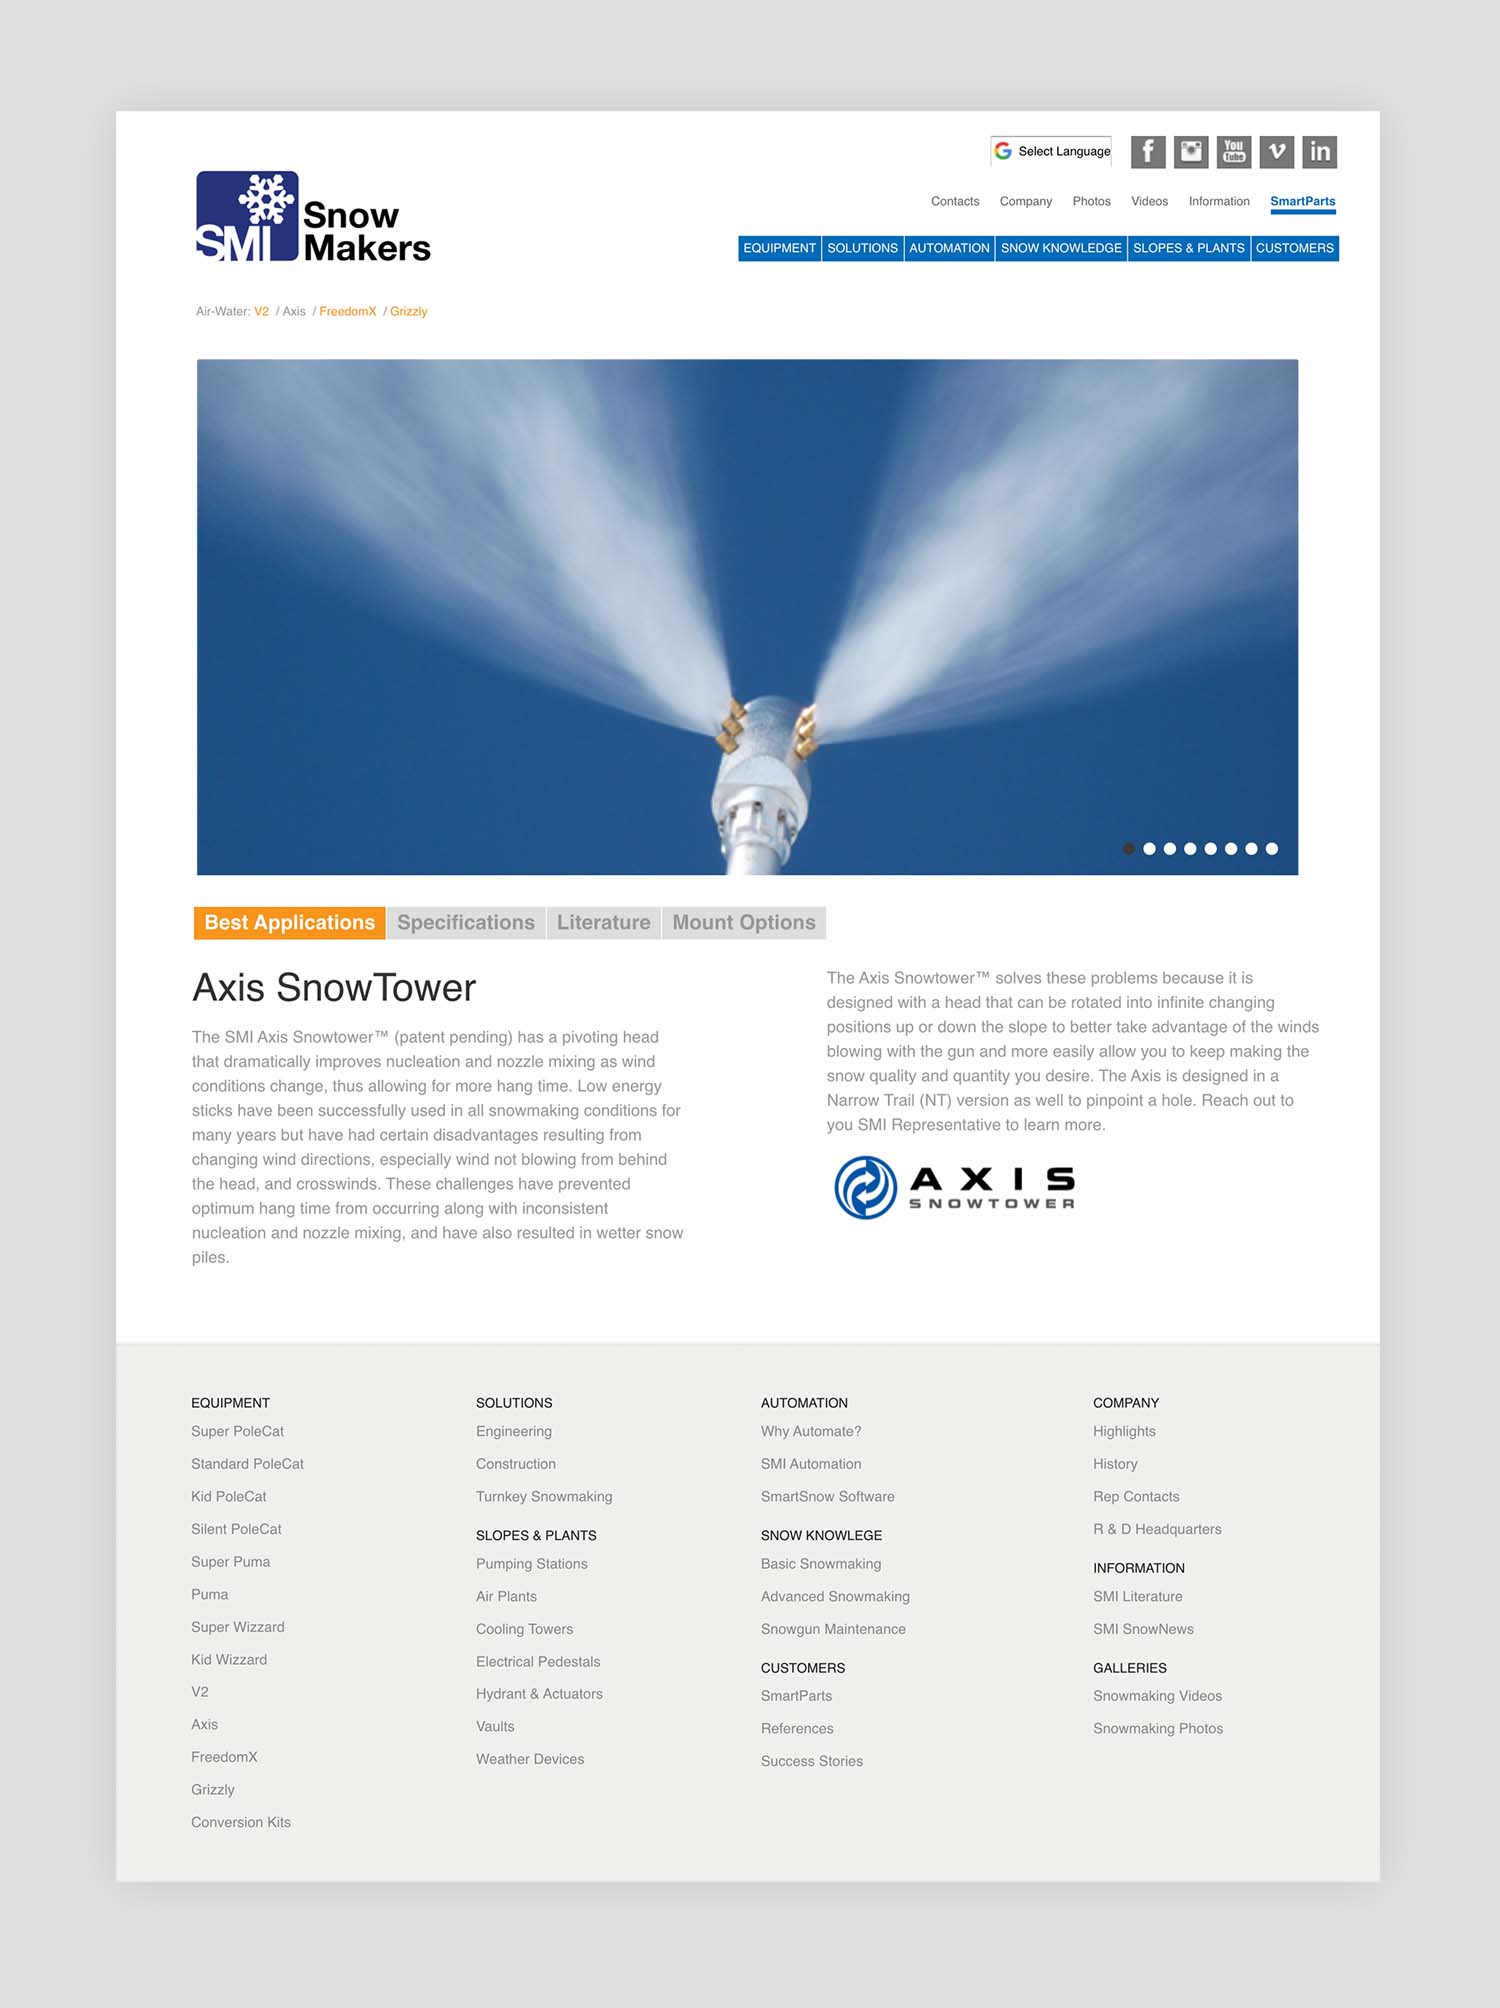 ip SMI SnowMakers website Axis SnowTower mockup by Design Direction llc